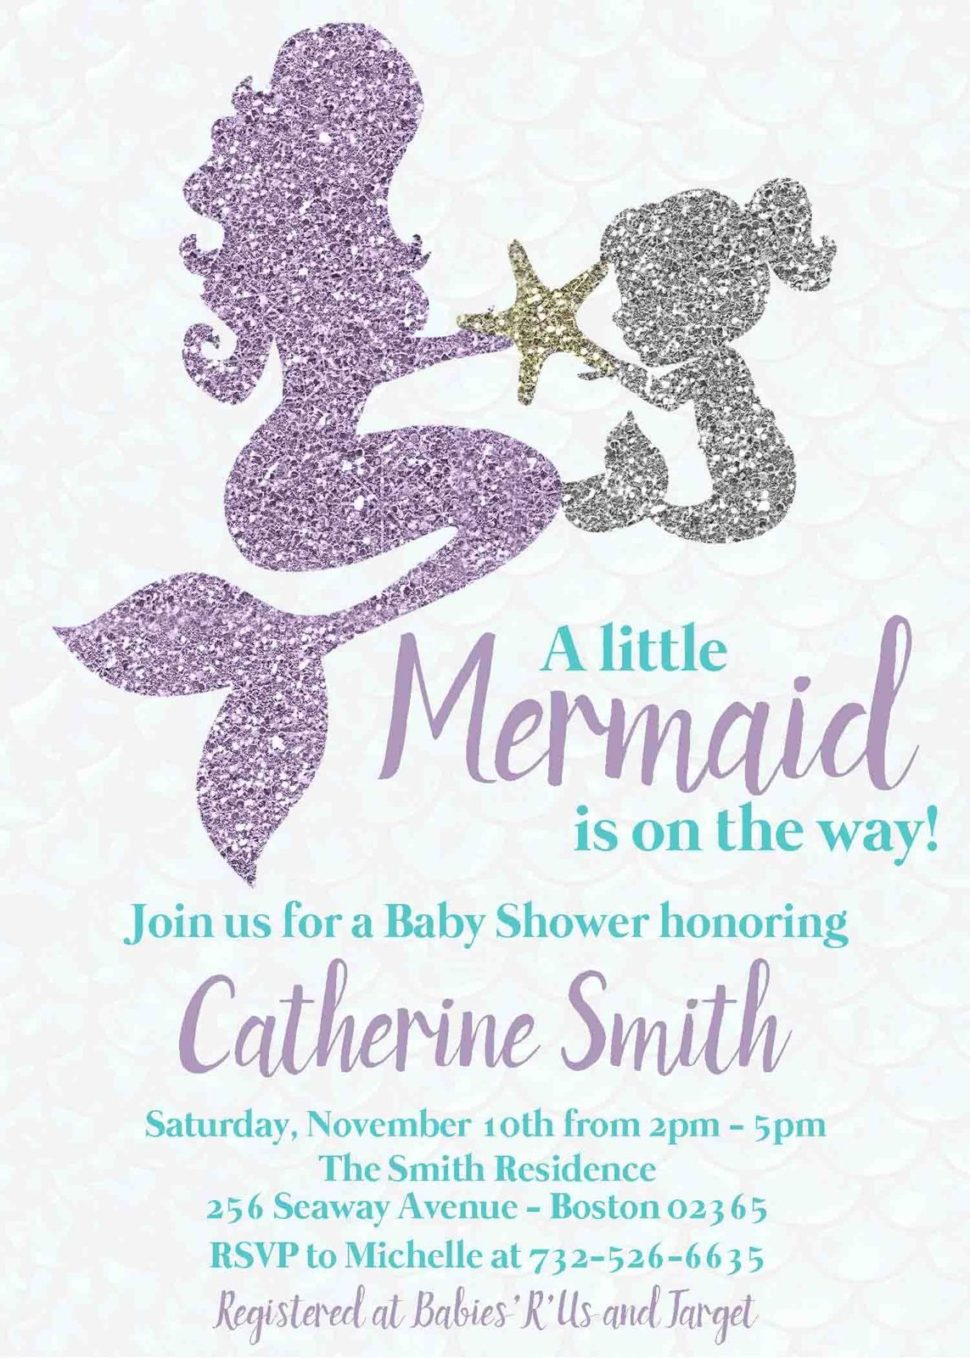 Medium Size of Baby Shower:63+ Delightful Cheap Baby Shower Invitations Image Inspirations Cheap Baby Shower Invitations Mermaid Baby Shower Invitation Mother Baby Under The Sea Party Teal Teal And Lavender Glitter Mermaid Mother And Child Baby Shower Invitation